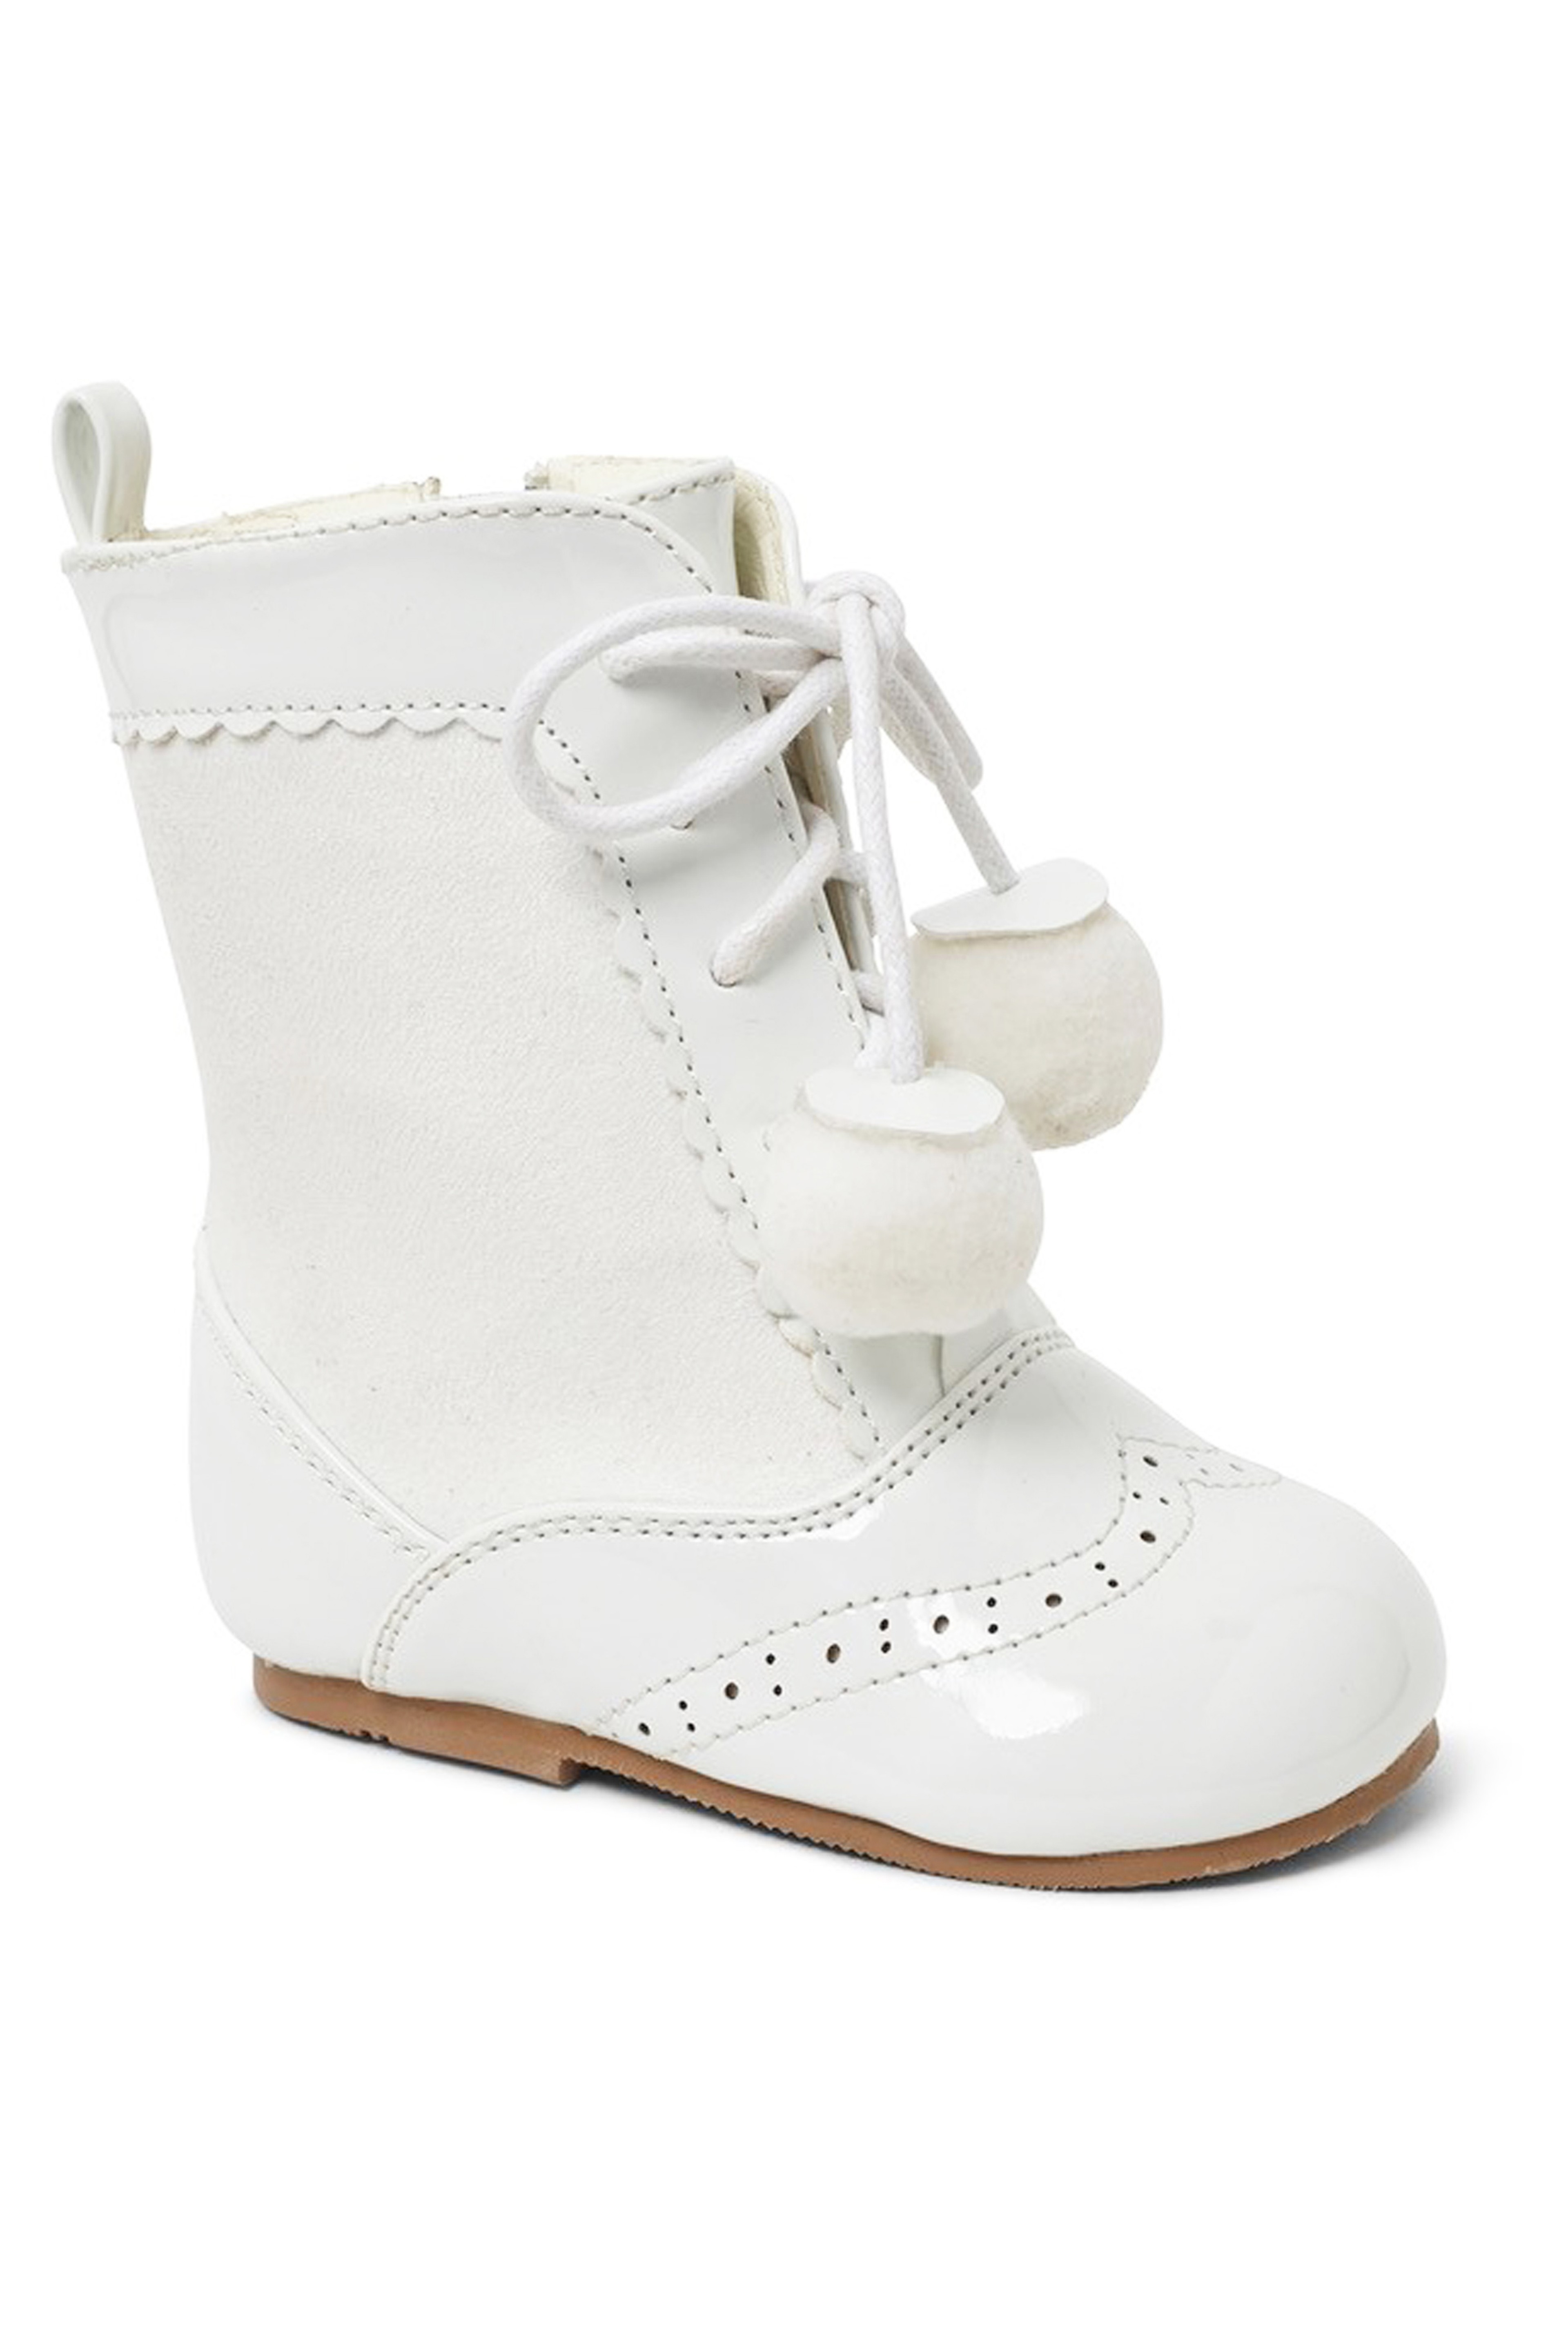 Kids Patent Leather Sienna Brogue Boots with Lace-Up and Pom-Pom Details, Unisex Classic Footwear - White